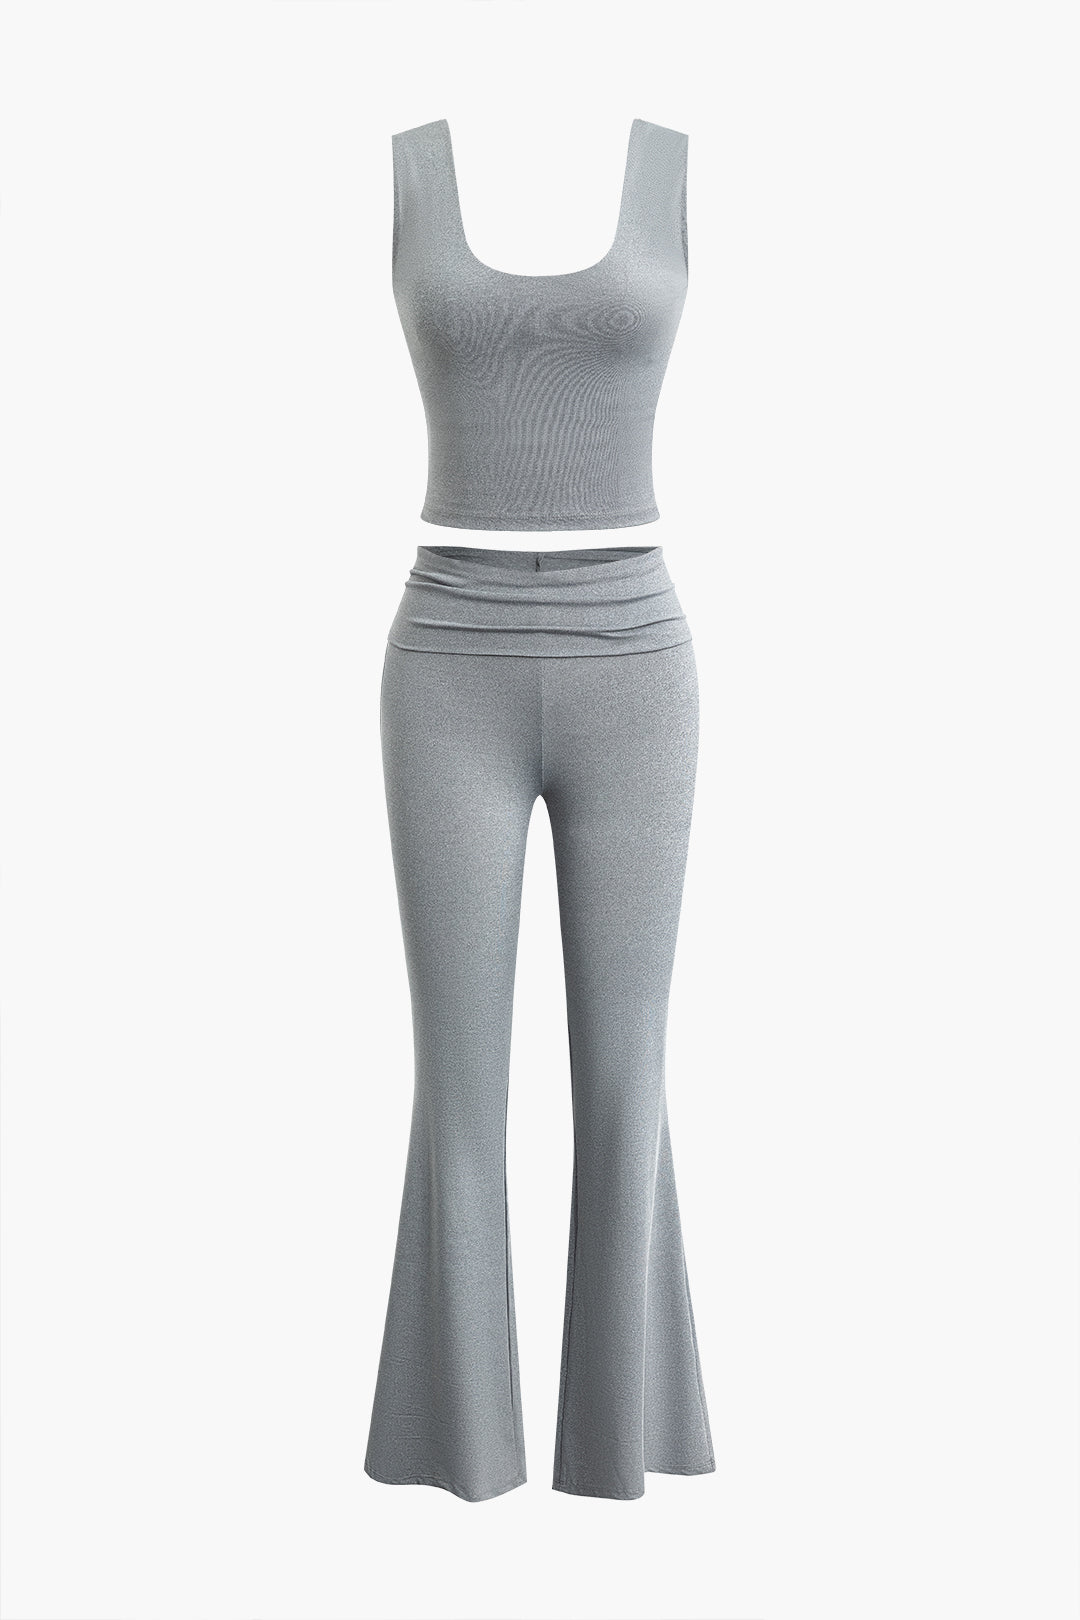 Basic Solid Tank Top And Flare Leg Pants Set